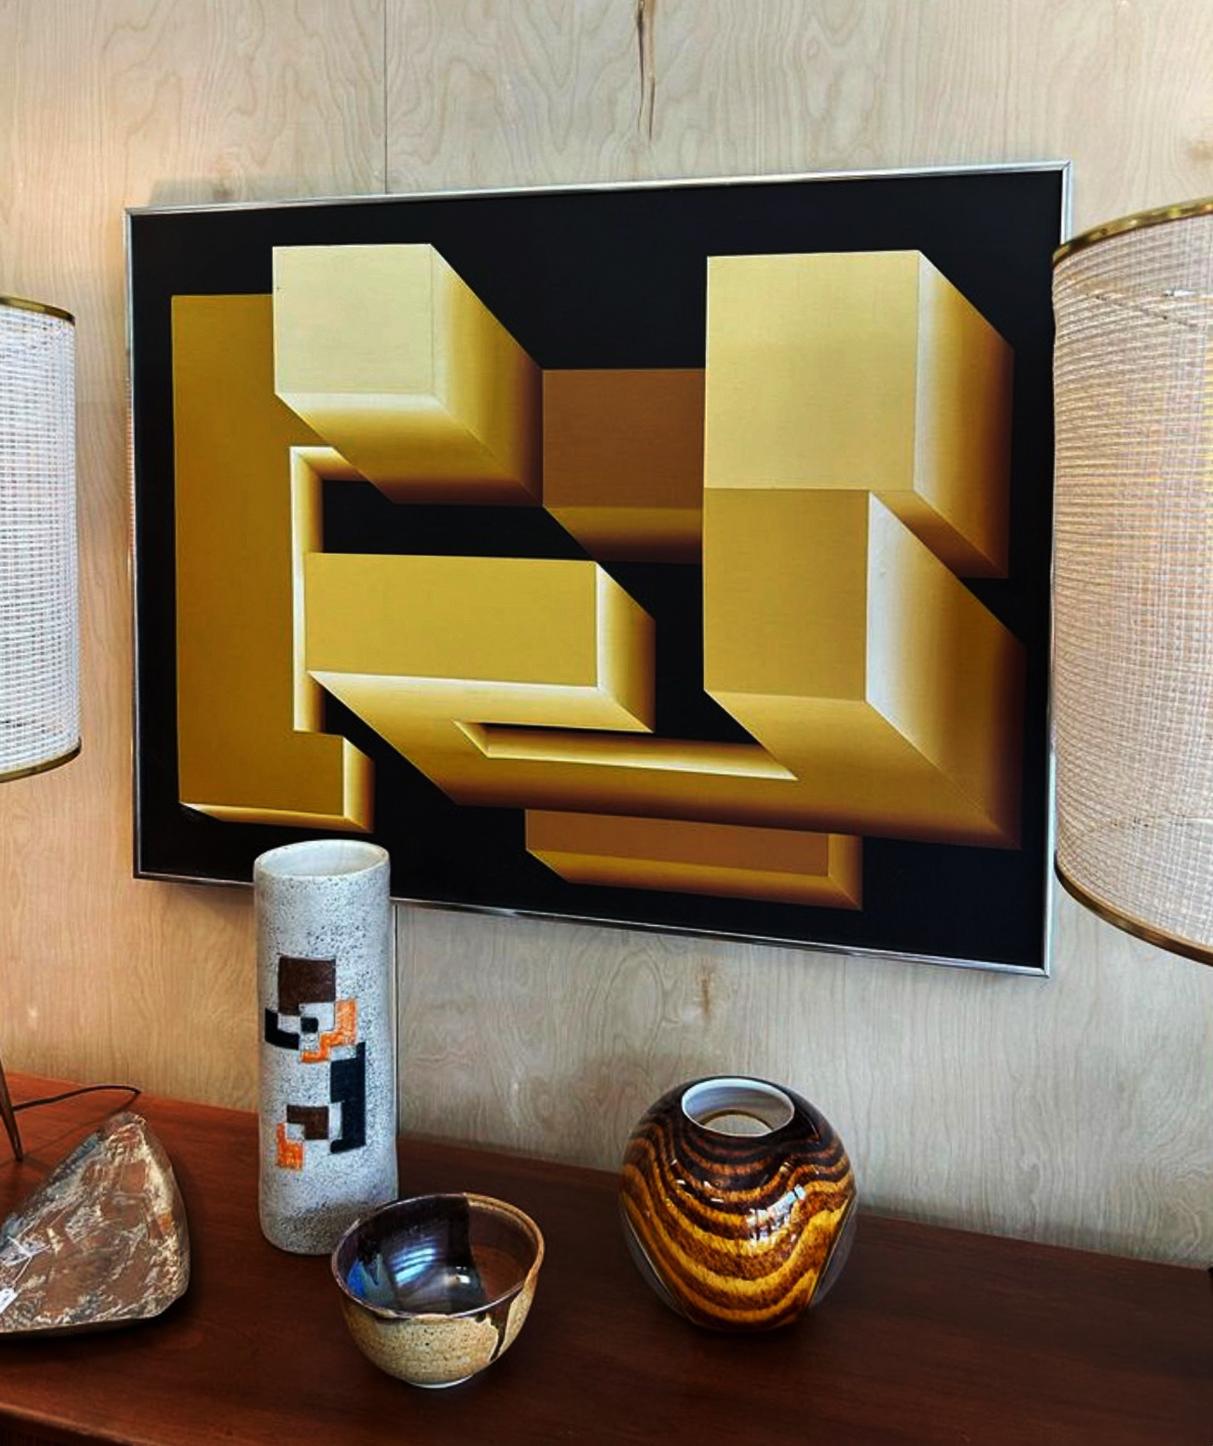 


Vintage Abstract Op Art Painting by Grace Alhades and Marty Sherma

Offered for sale is a 1980s abstract Op Art painting by Grace Alhades and Marty Sherma. This painting is one of the more complex works by the artists. The painting is presented